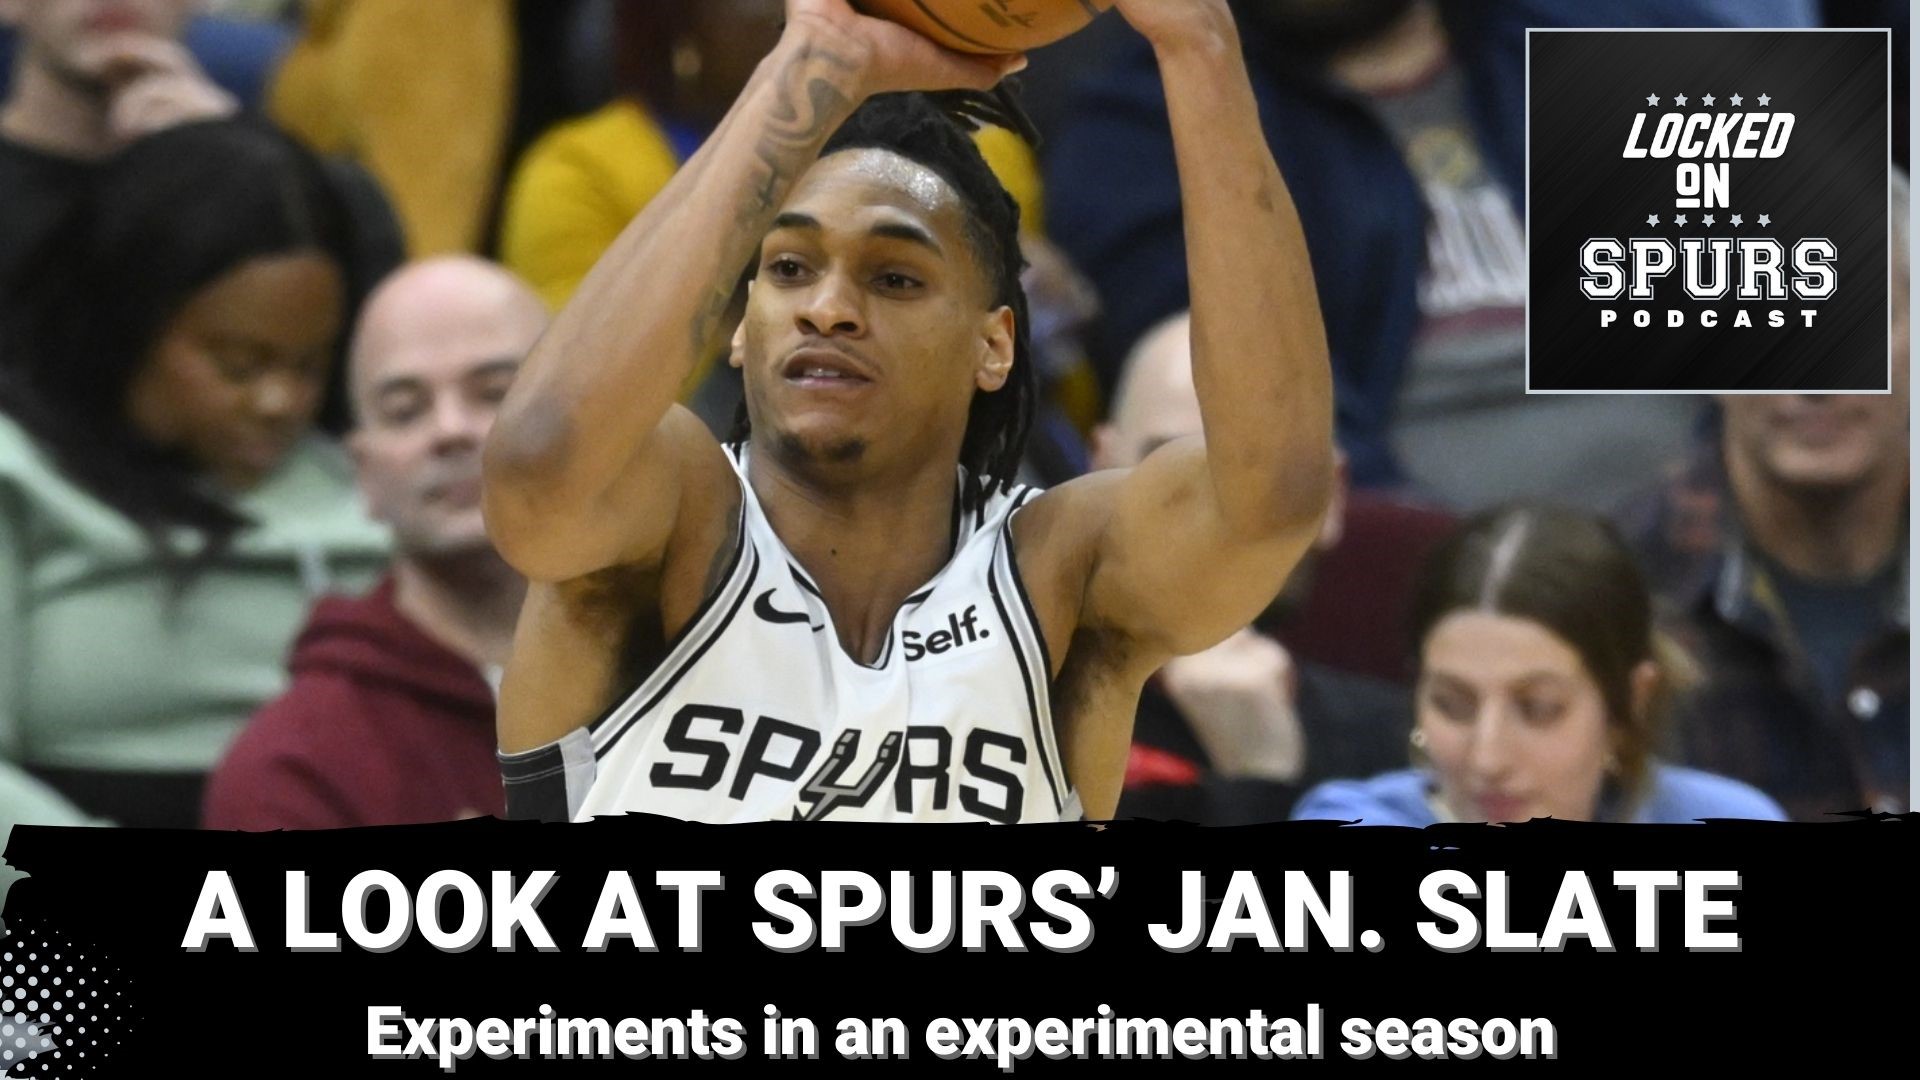 The Spurs have some winnable games this month.